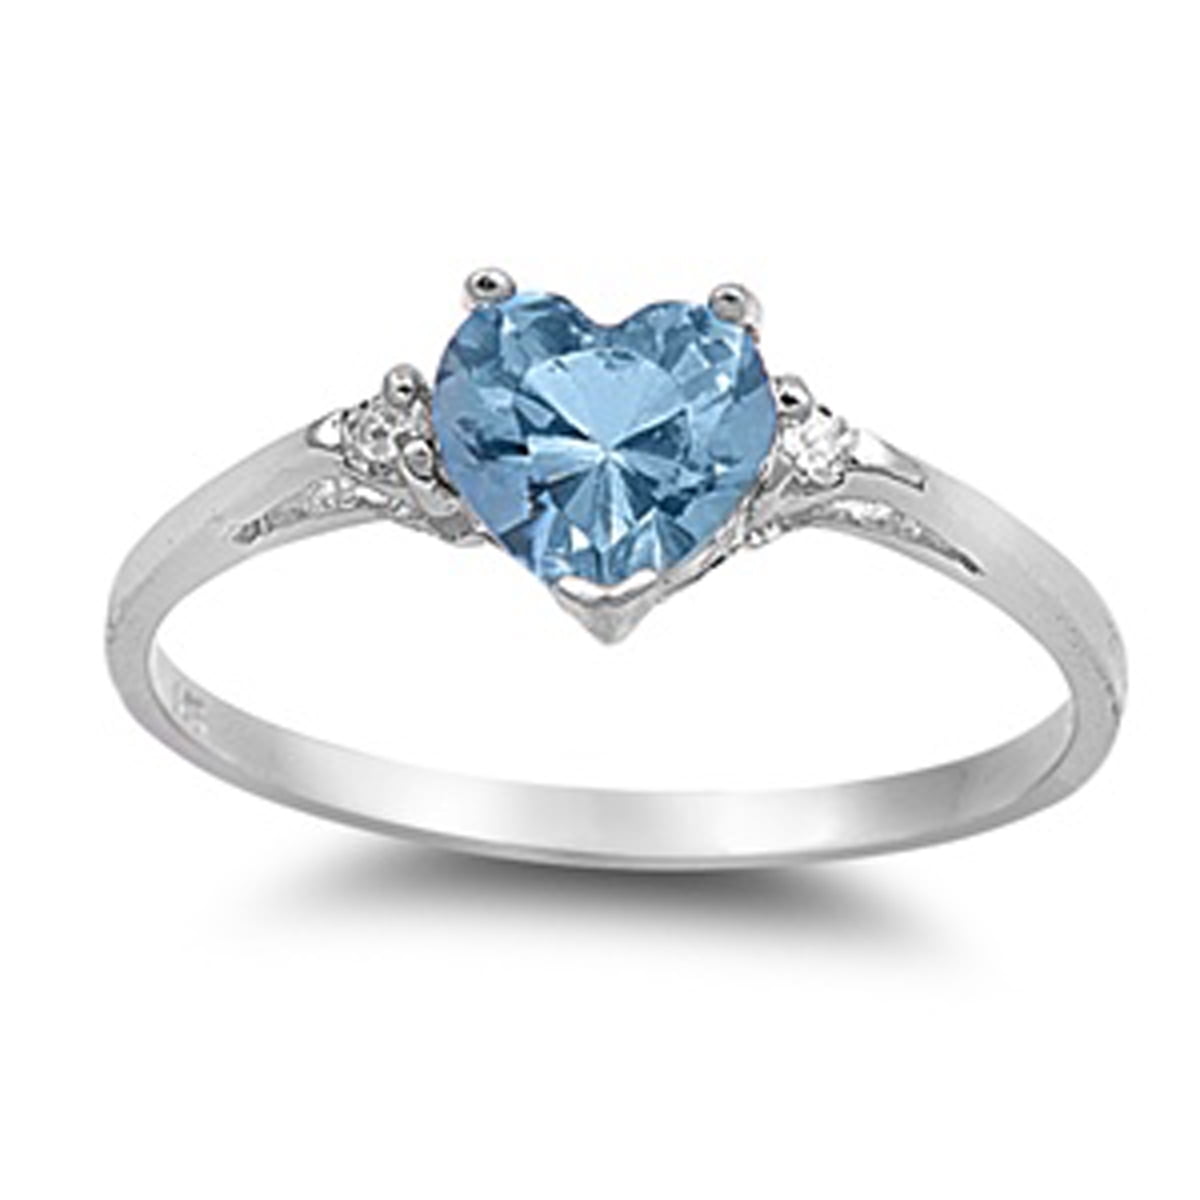 Sterling Silver Women's Flawless Simulated Aquamarine Cubic Zirconia ...